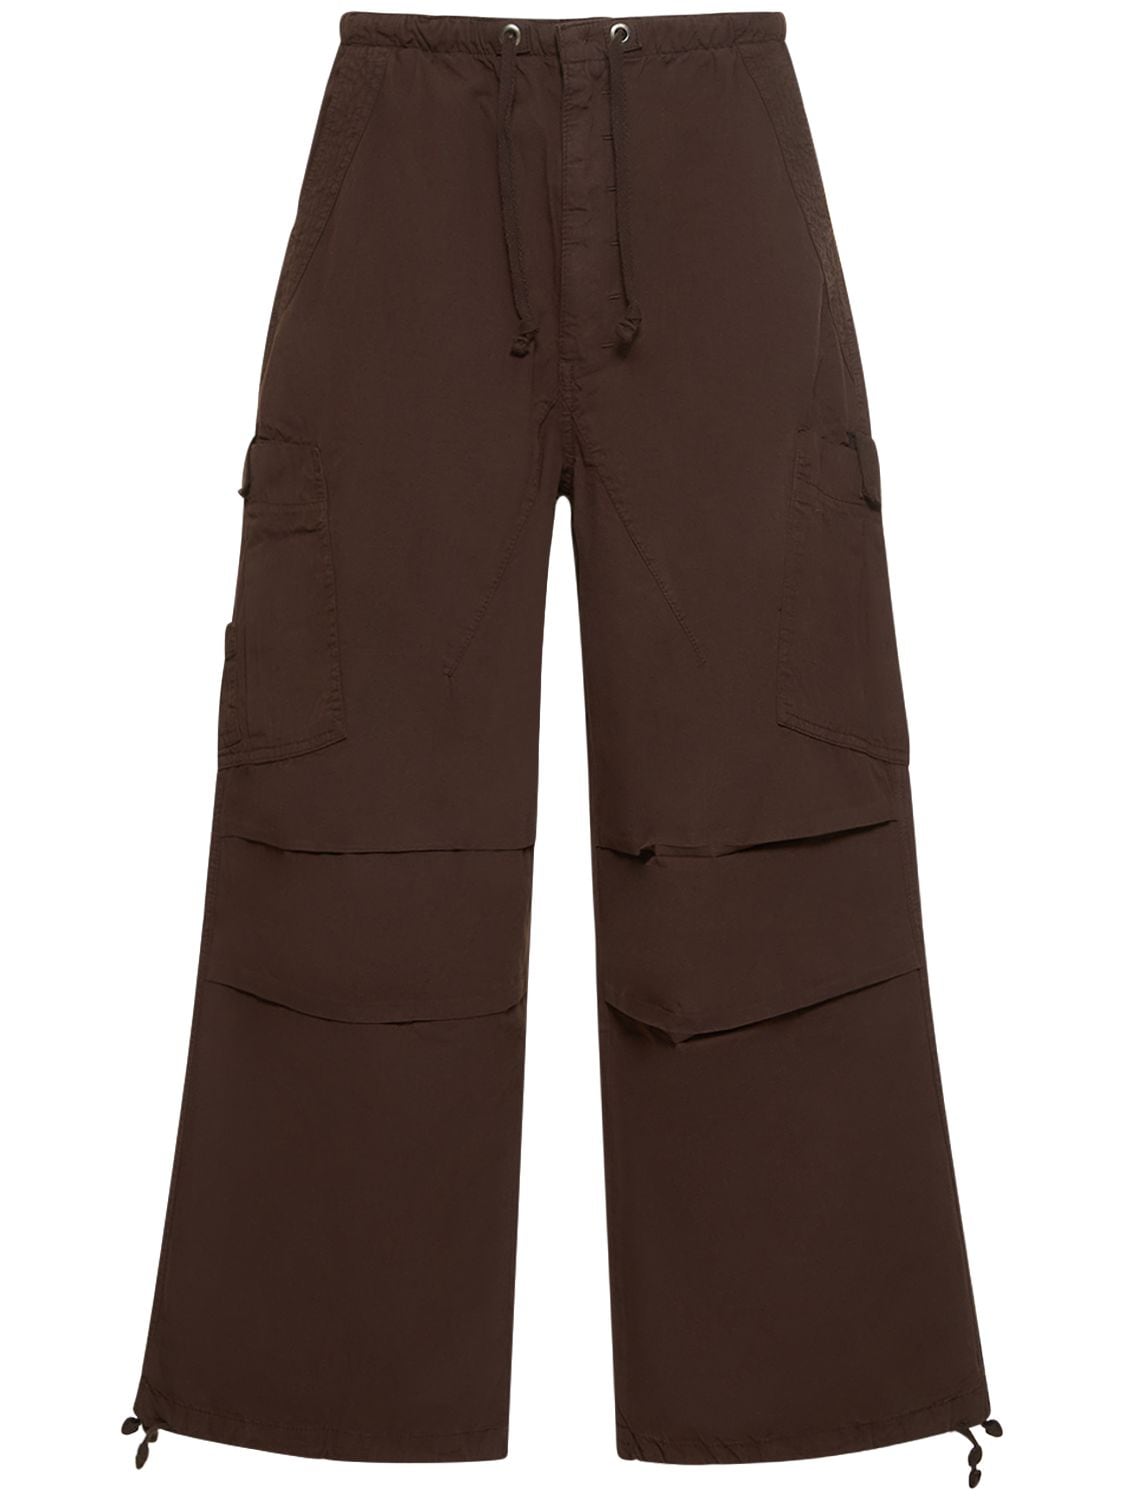 JADED LONDON Brown Oversize Military Cargo Pants